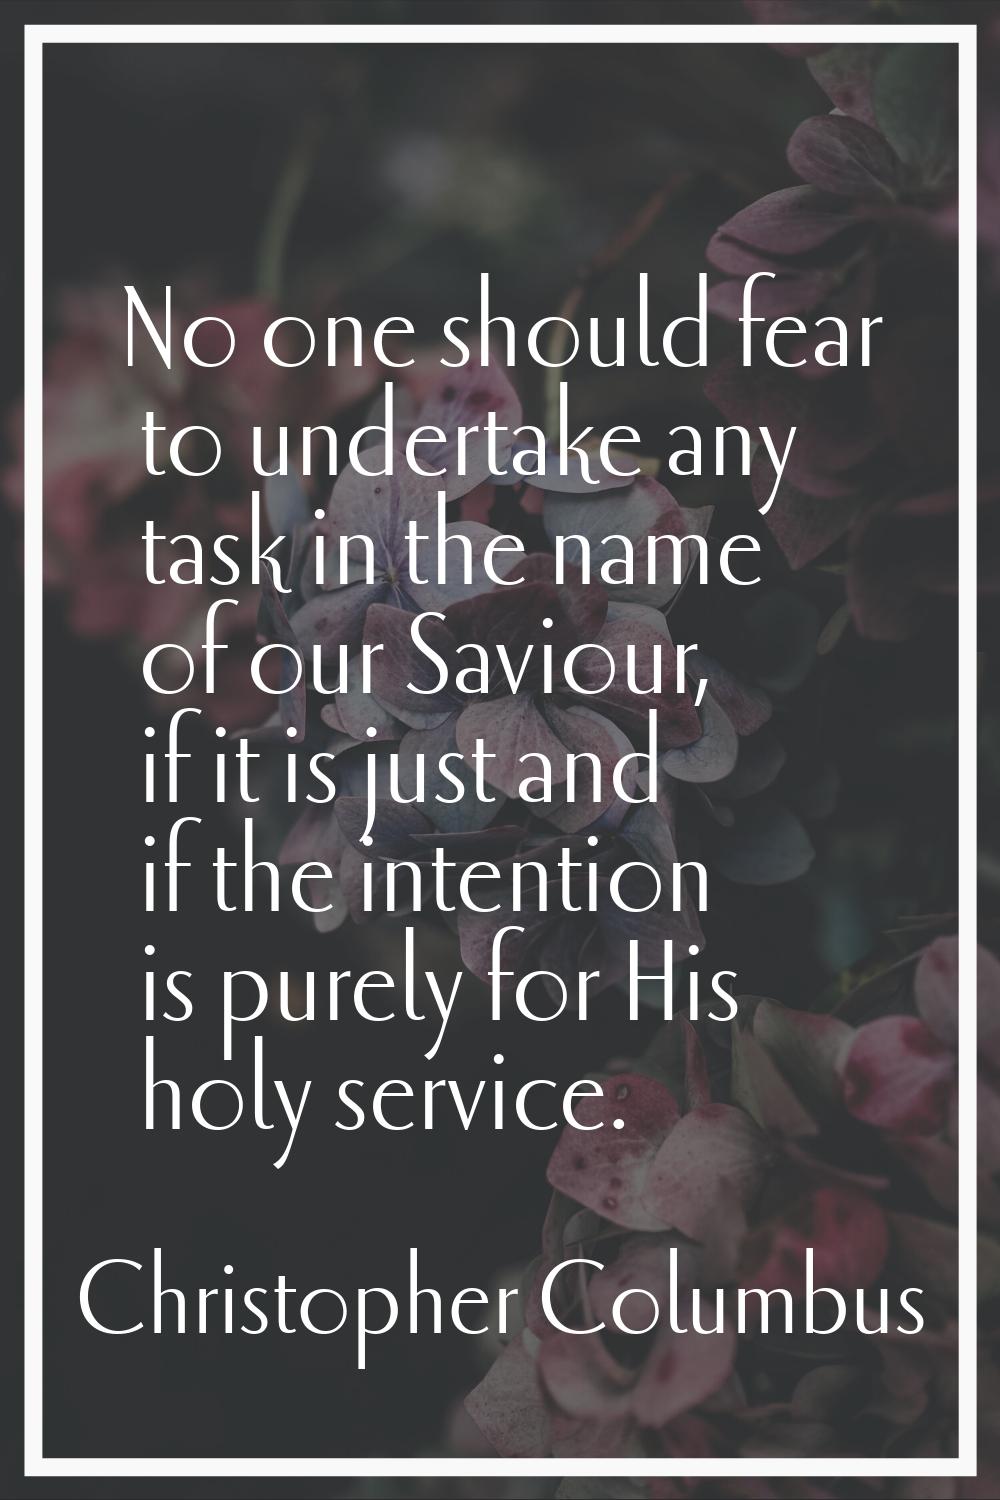 No one should fear to undertake any task in the name of our Saviour, if it is just and if the inten